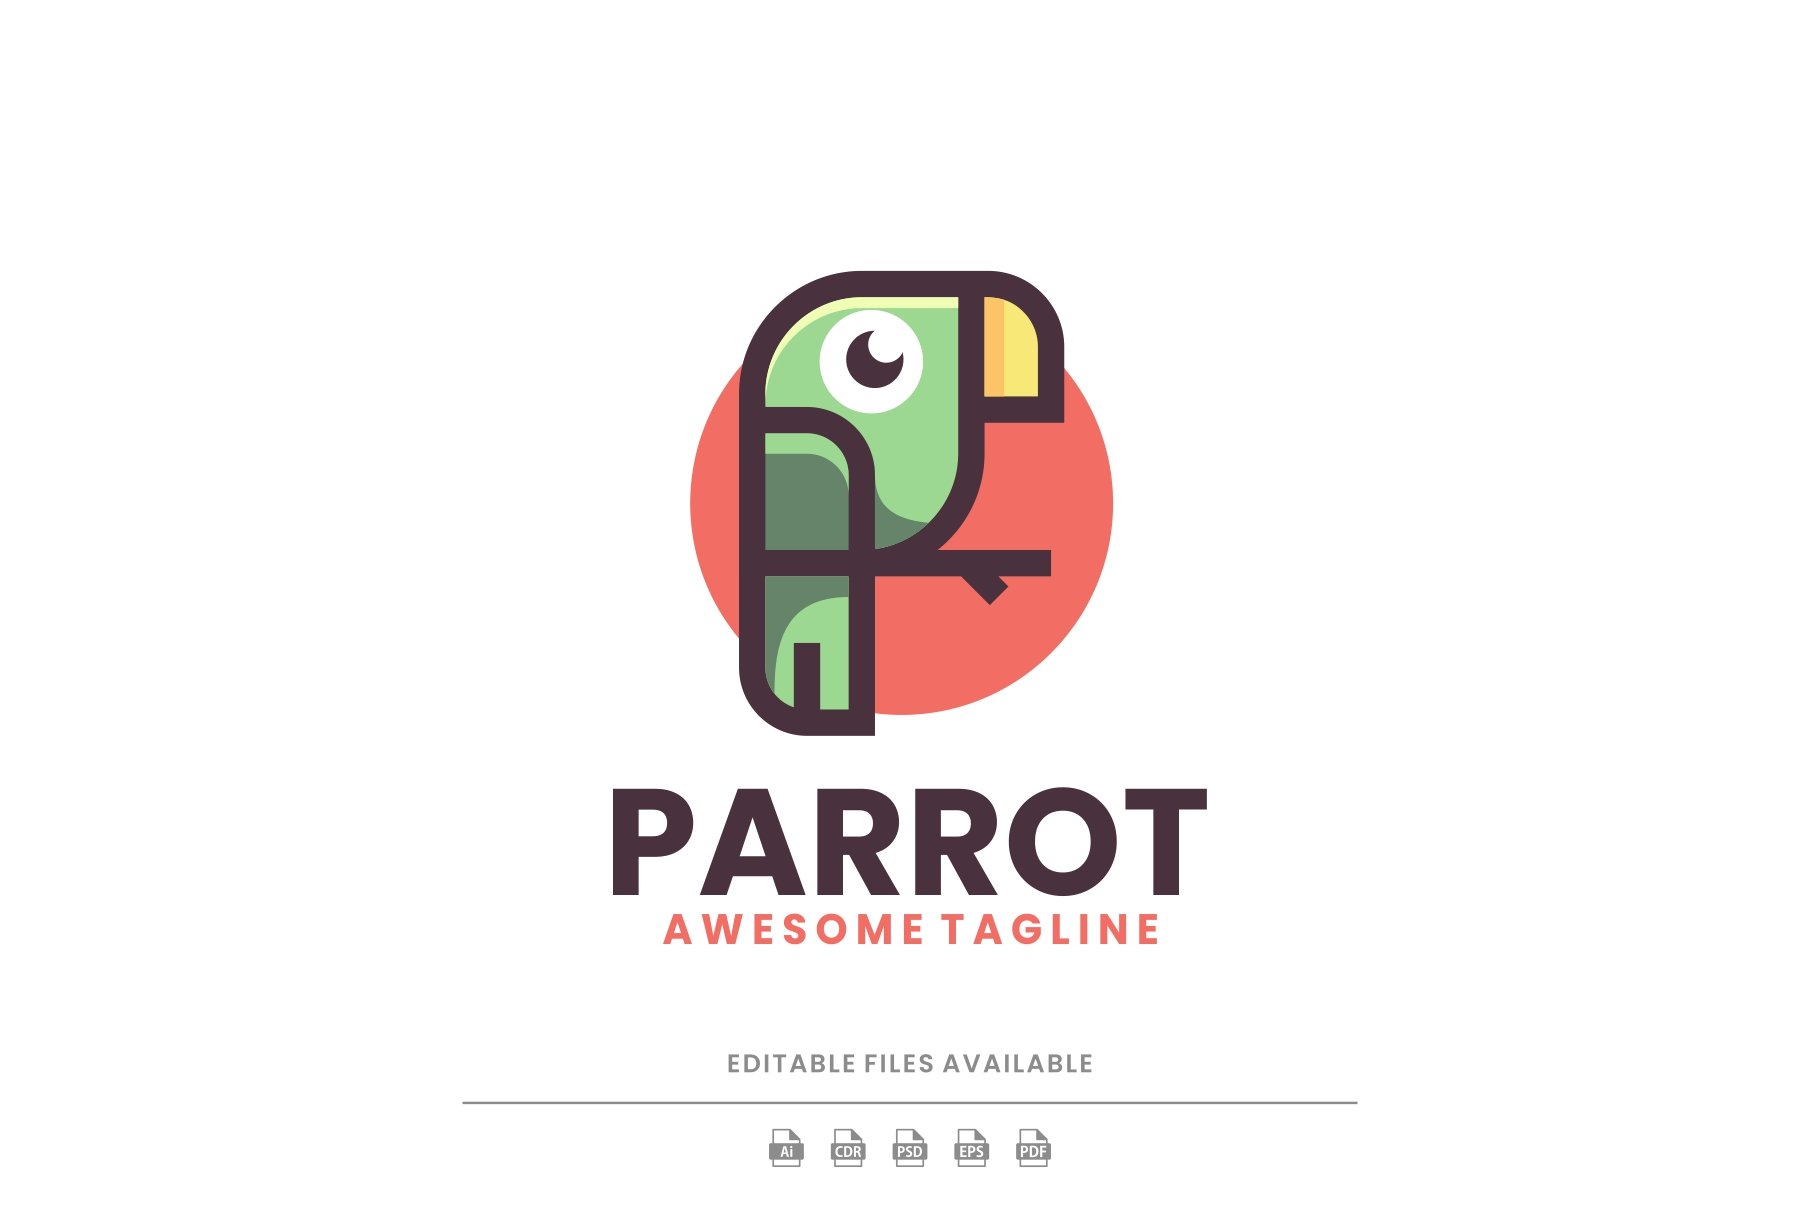 Parrot Simple Mascot Logo cover image.